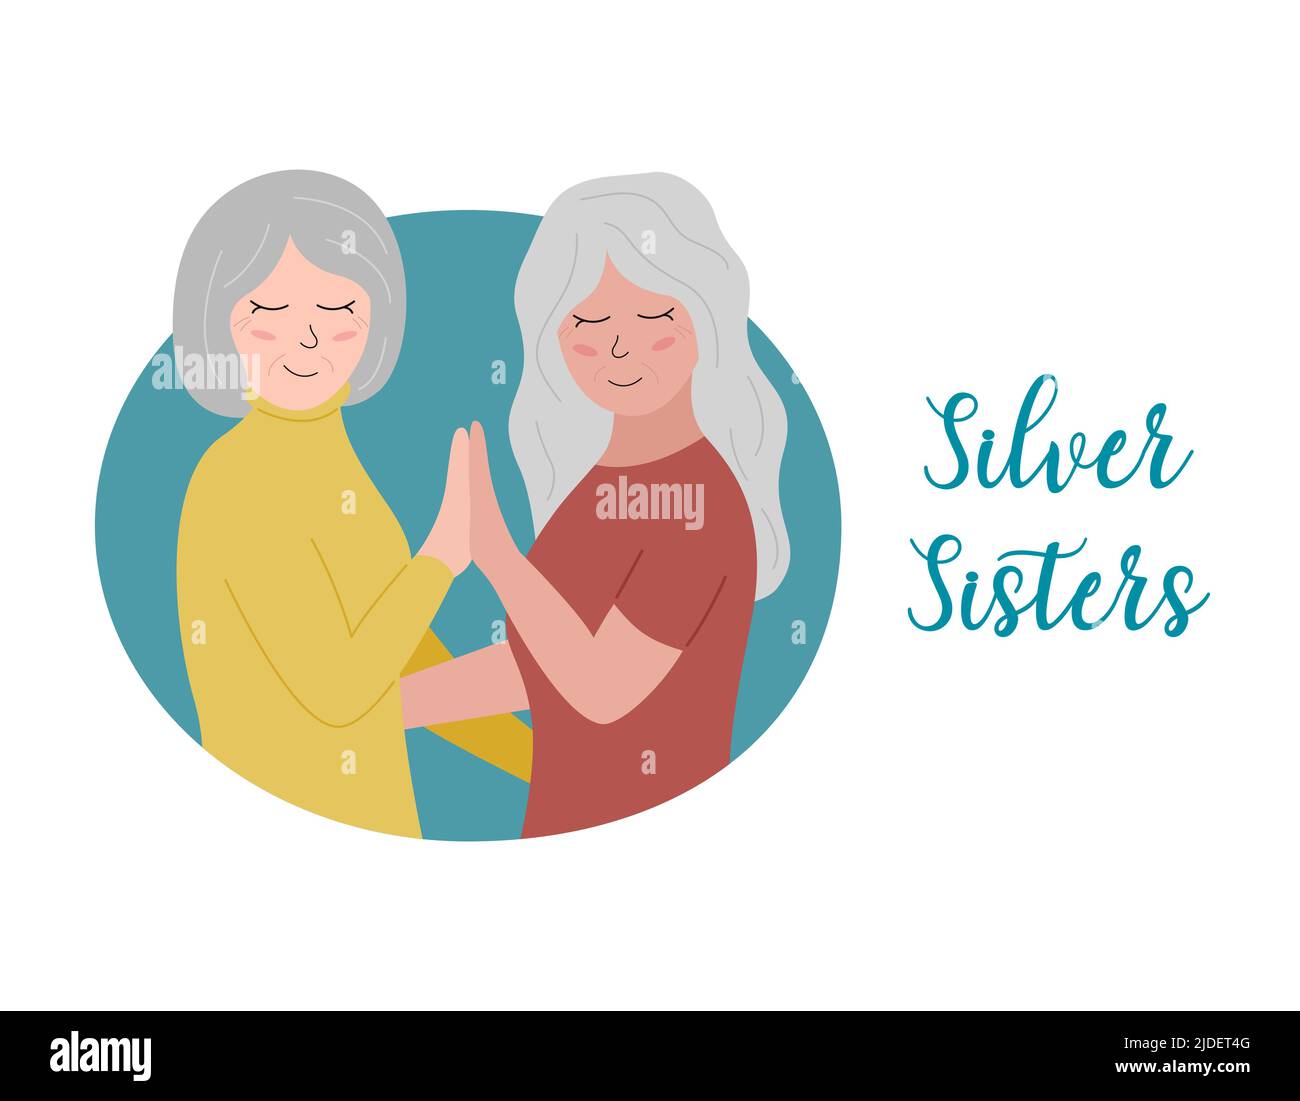 Silver sisters concept. Senior women together. Older female friends with gray hair. Women are proud of age and hair color. Flat vector illustration. Stock Vector